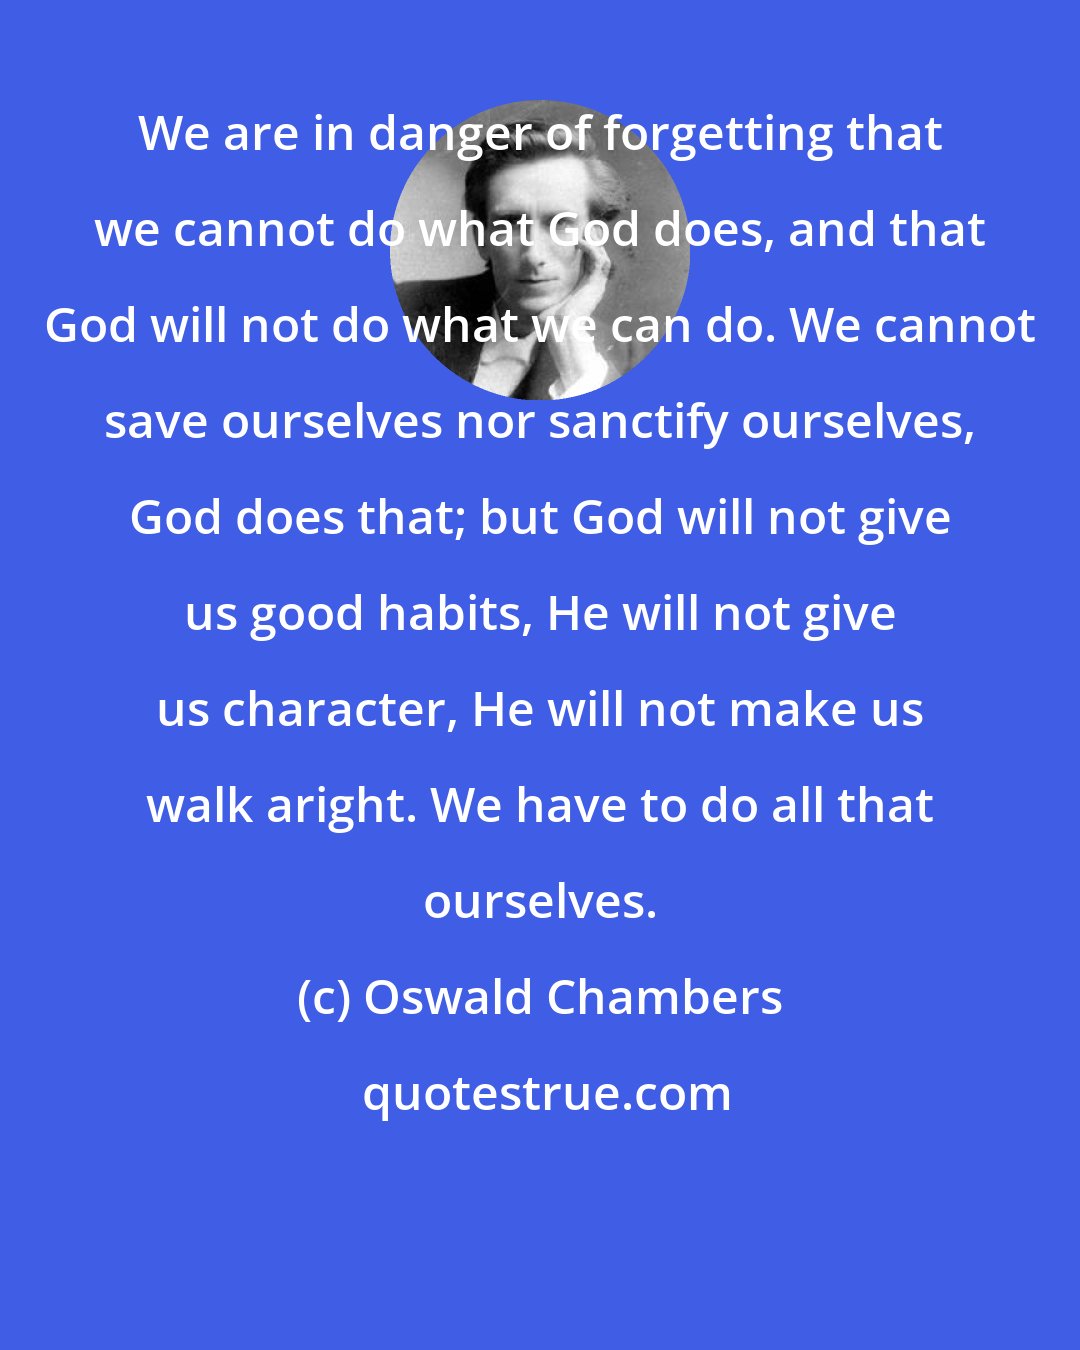 Oswald Chambers: We are in danger of forgetting that we cannot do what God does, and that God will not do what we can do. We cannot save ourselves nor sanctify ourselves, God does that; but God will not give us good habits, He will not give us character, He will not make us walk aright. We have to do all that ourselves.